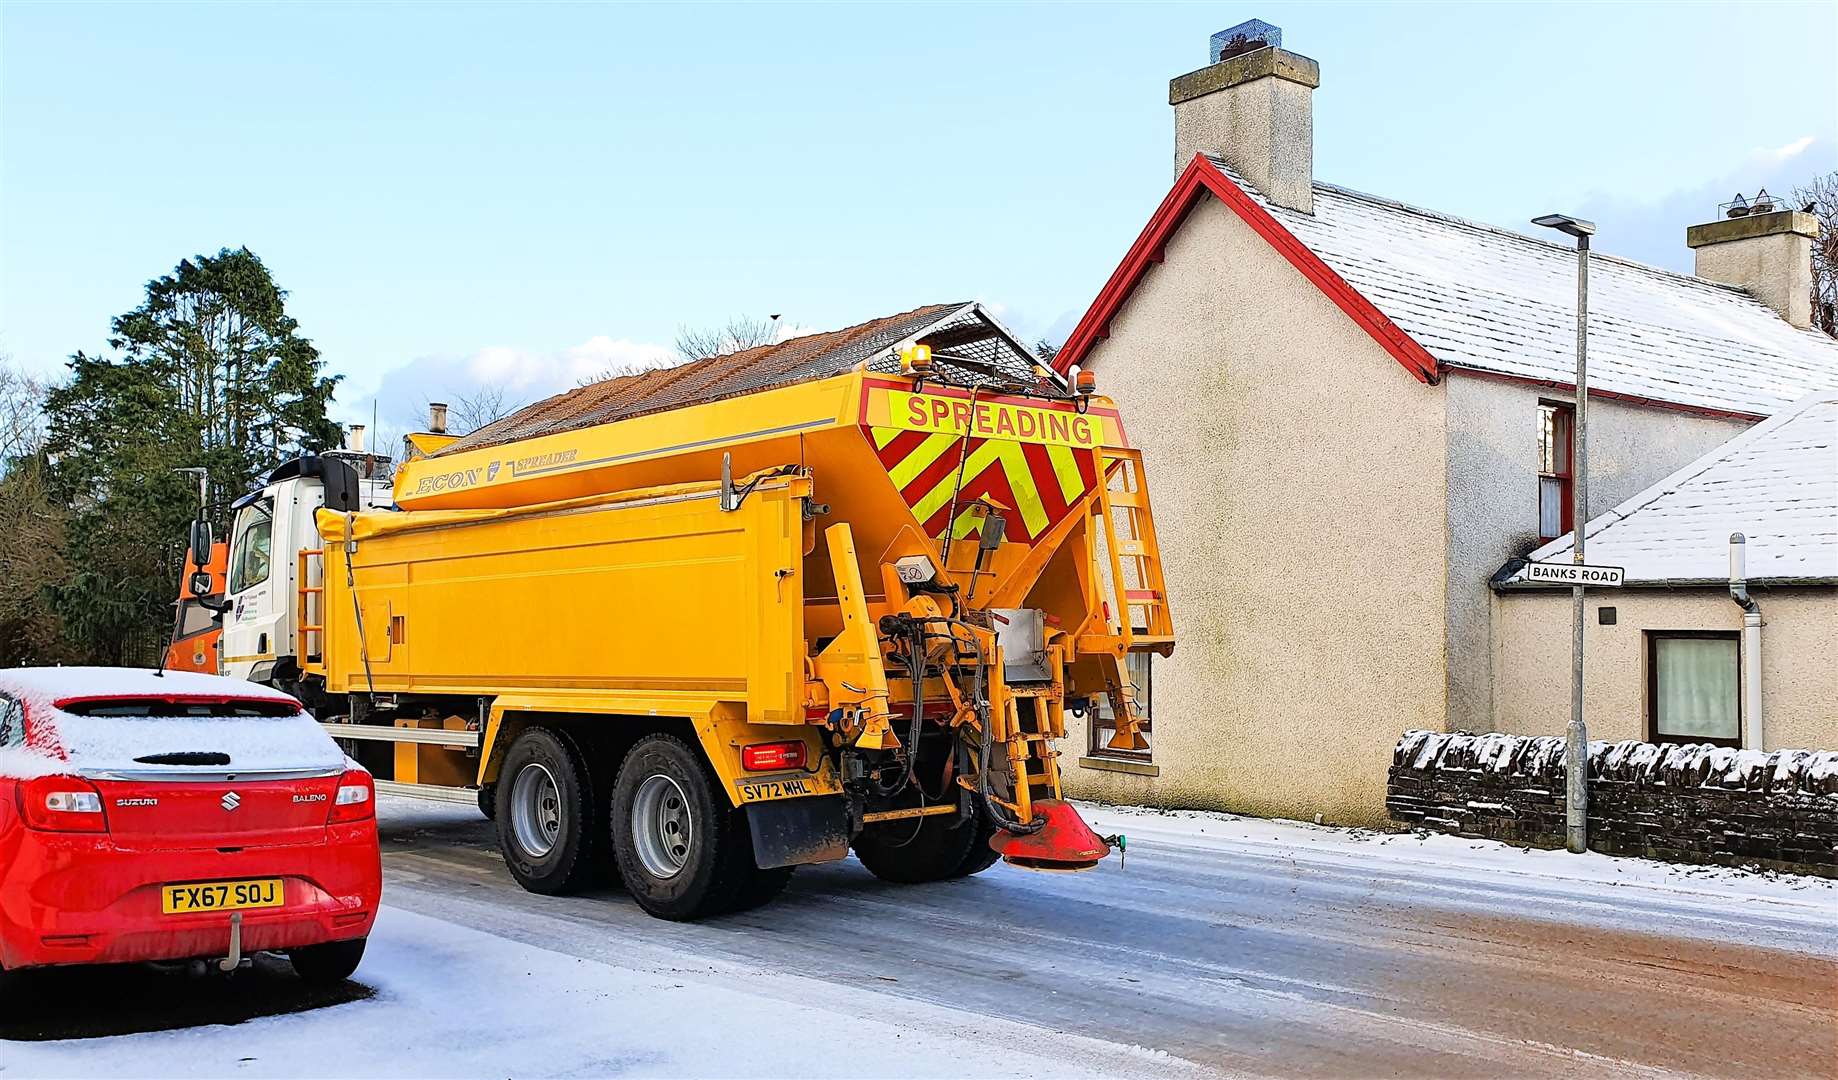 Gritter operating in Watten. Picture: DGS